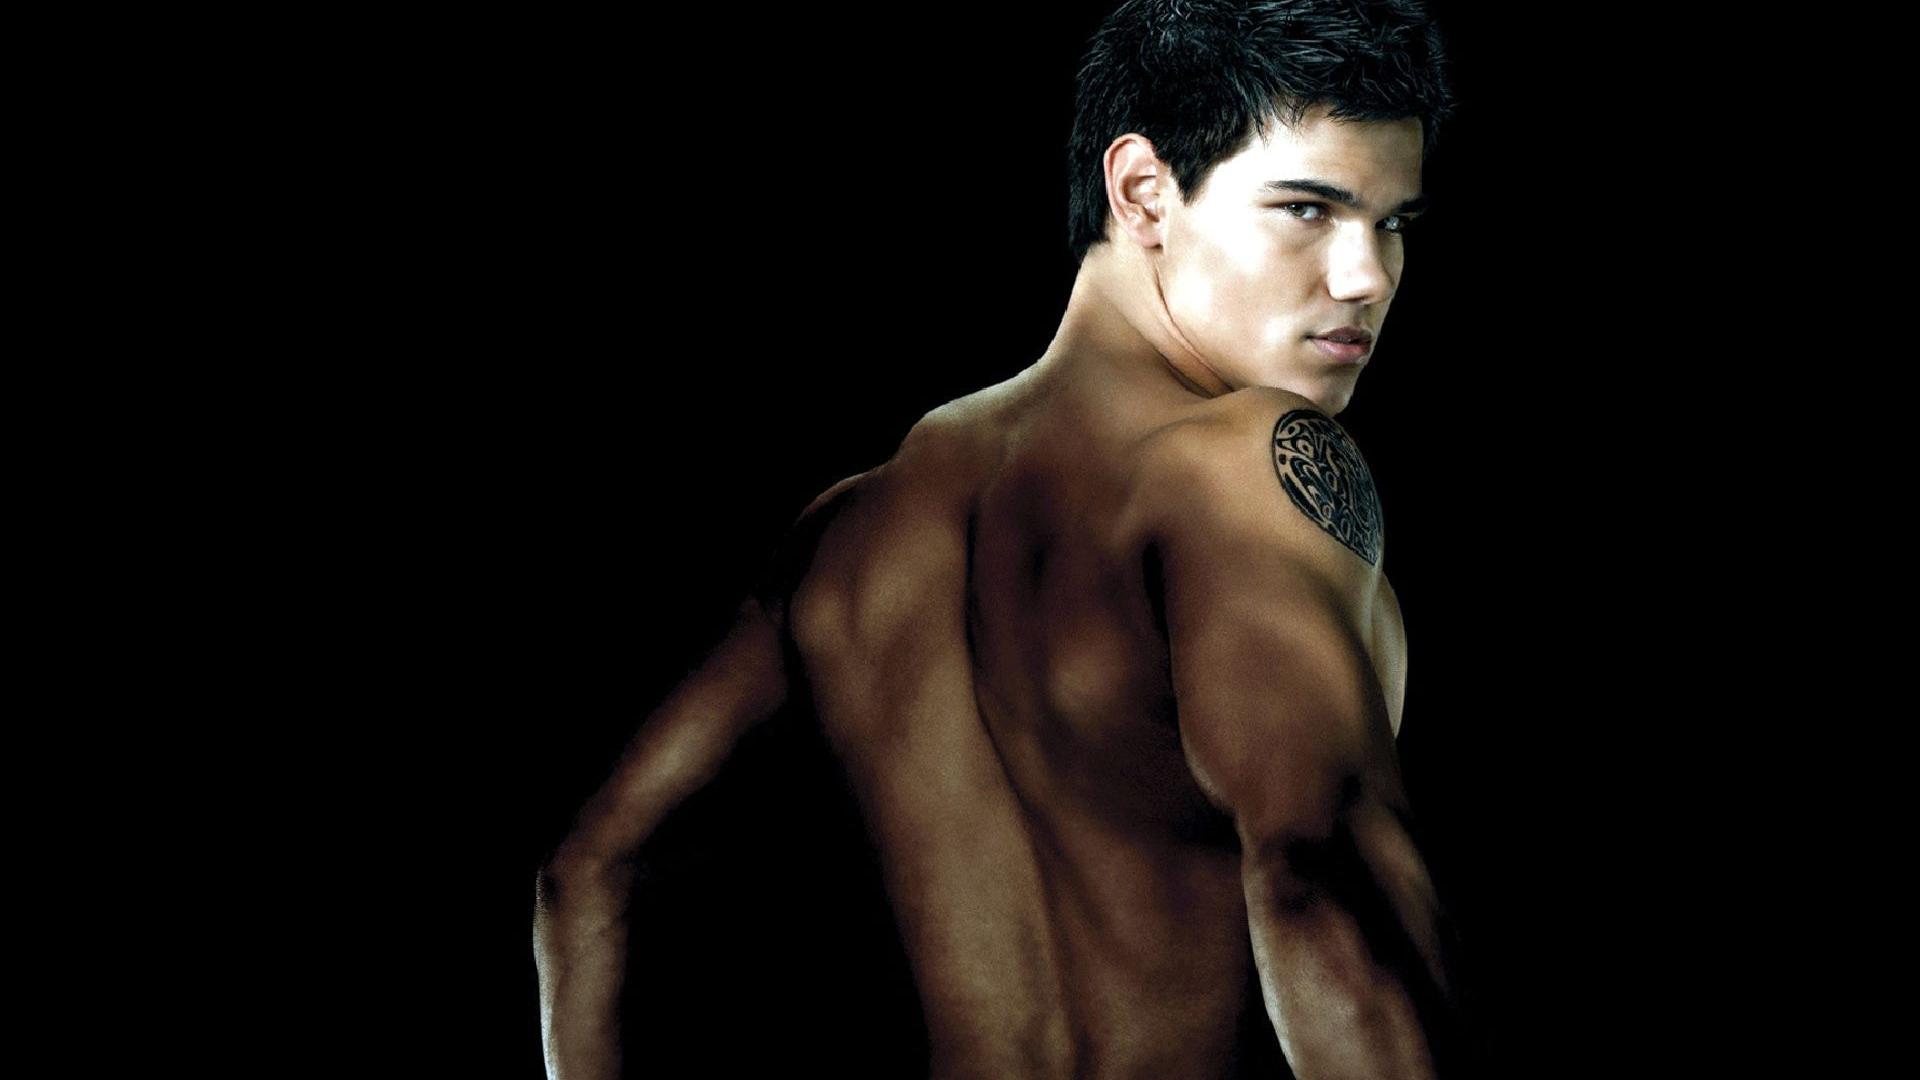 Taylor Lautner With His Shirt Off Image Thecelebritypix